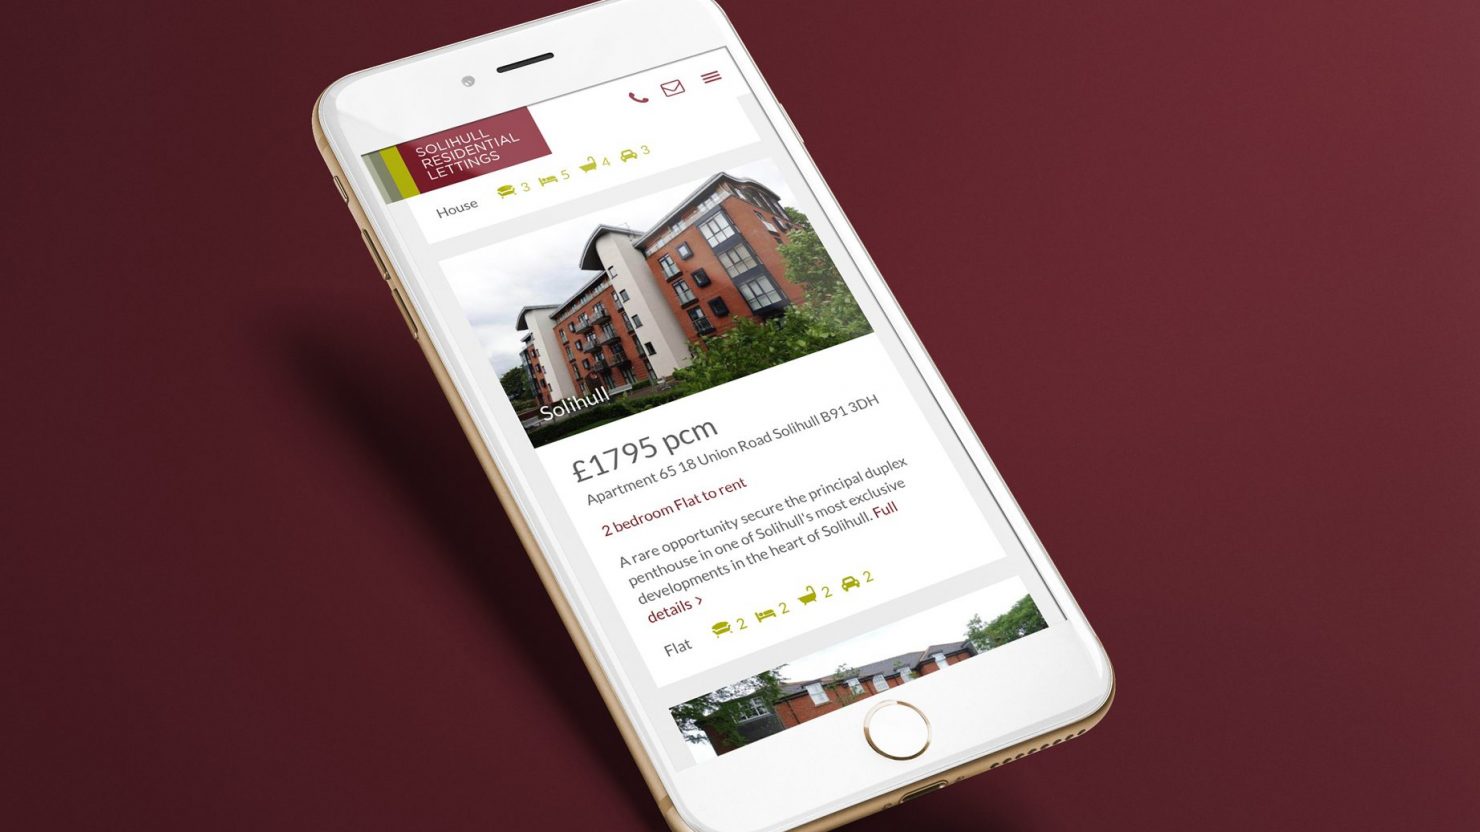 iPhone showing website design and branding for Solihull Residential Lettings